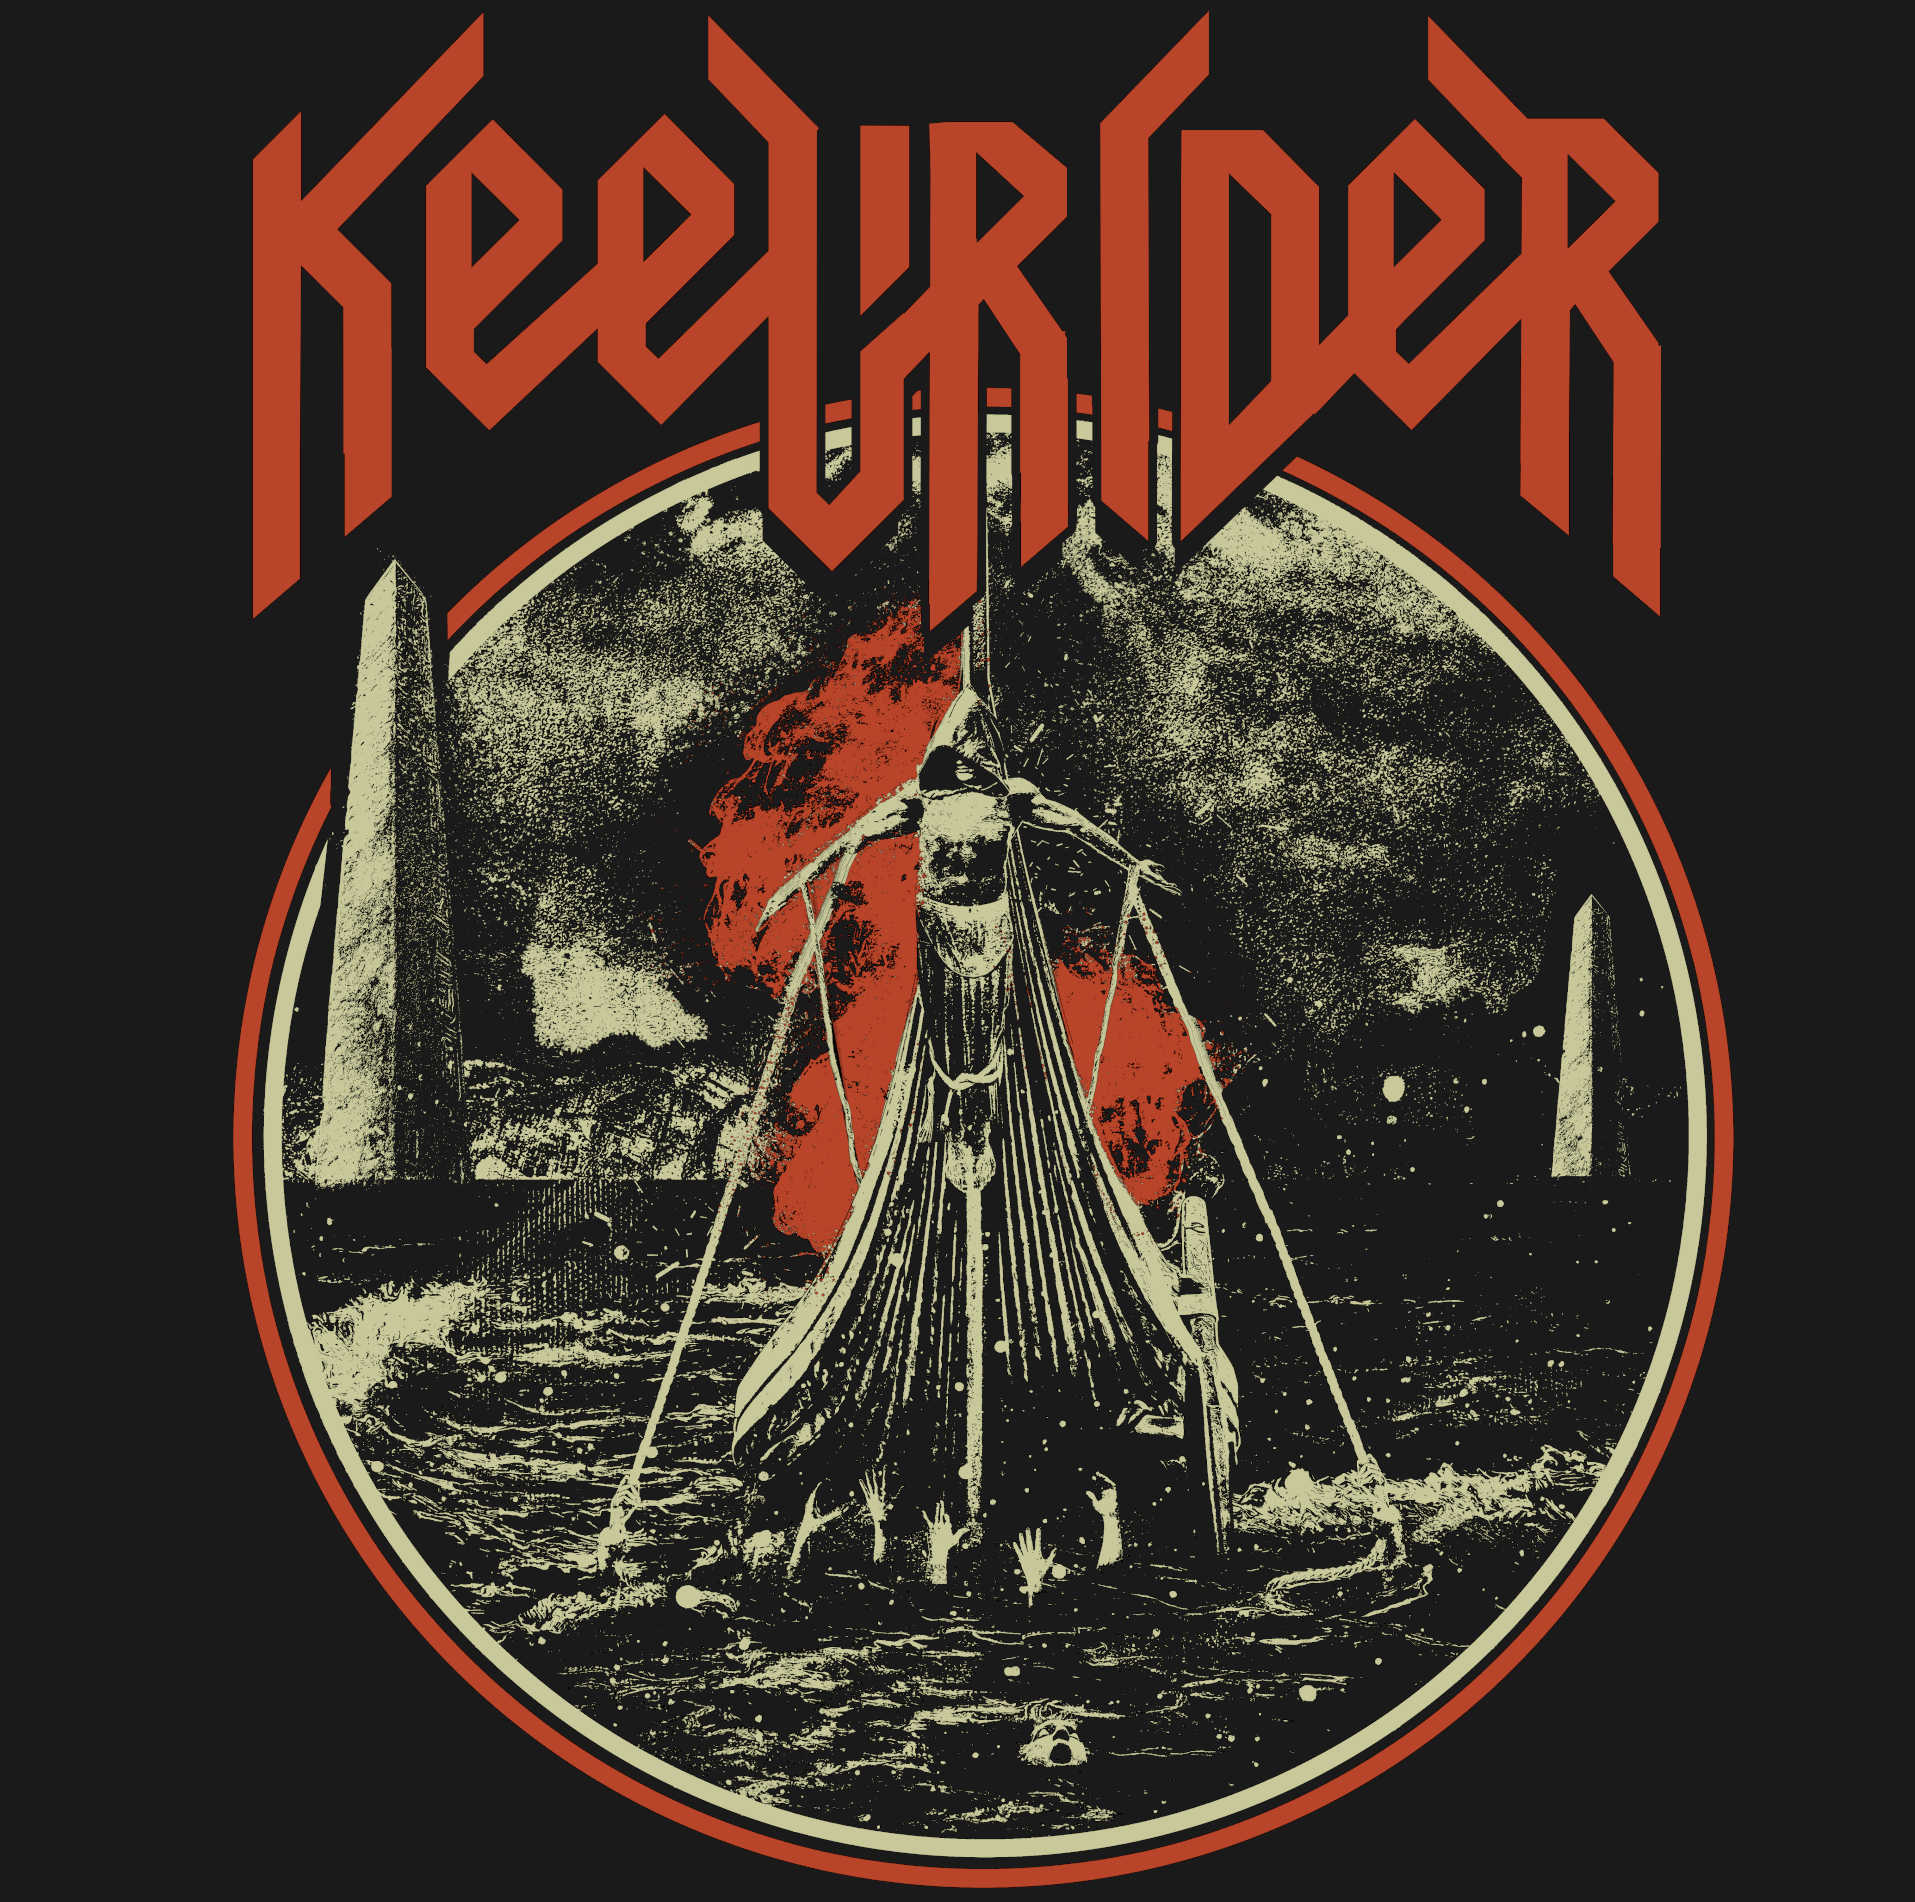 Pictures of Keelrider bandmembers